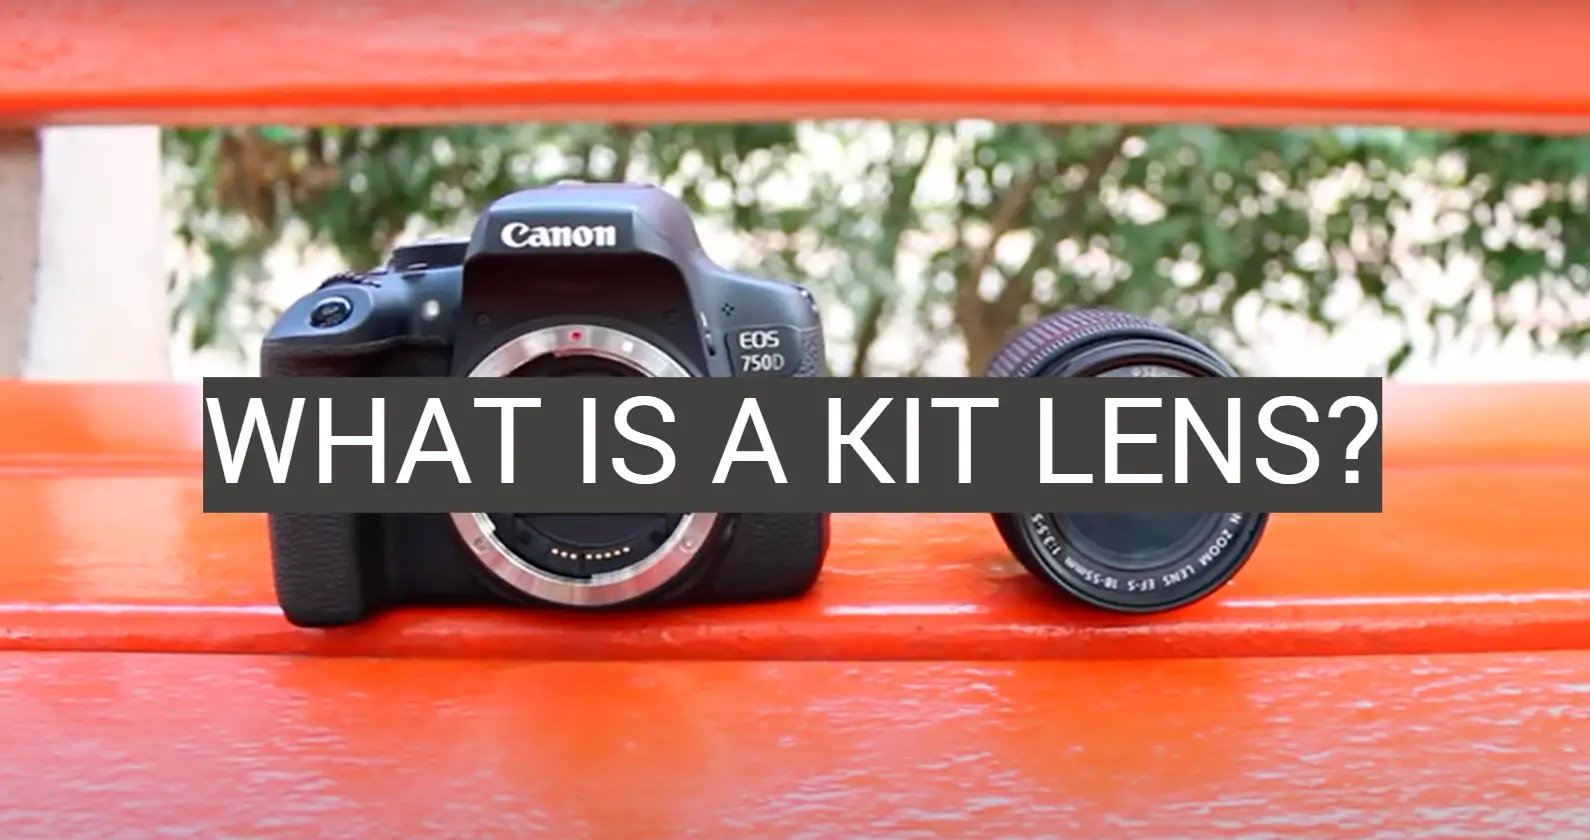 What is a Kit Lens?